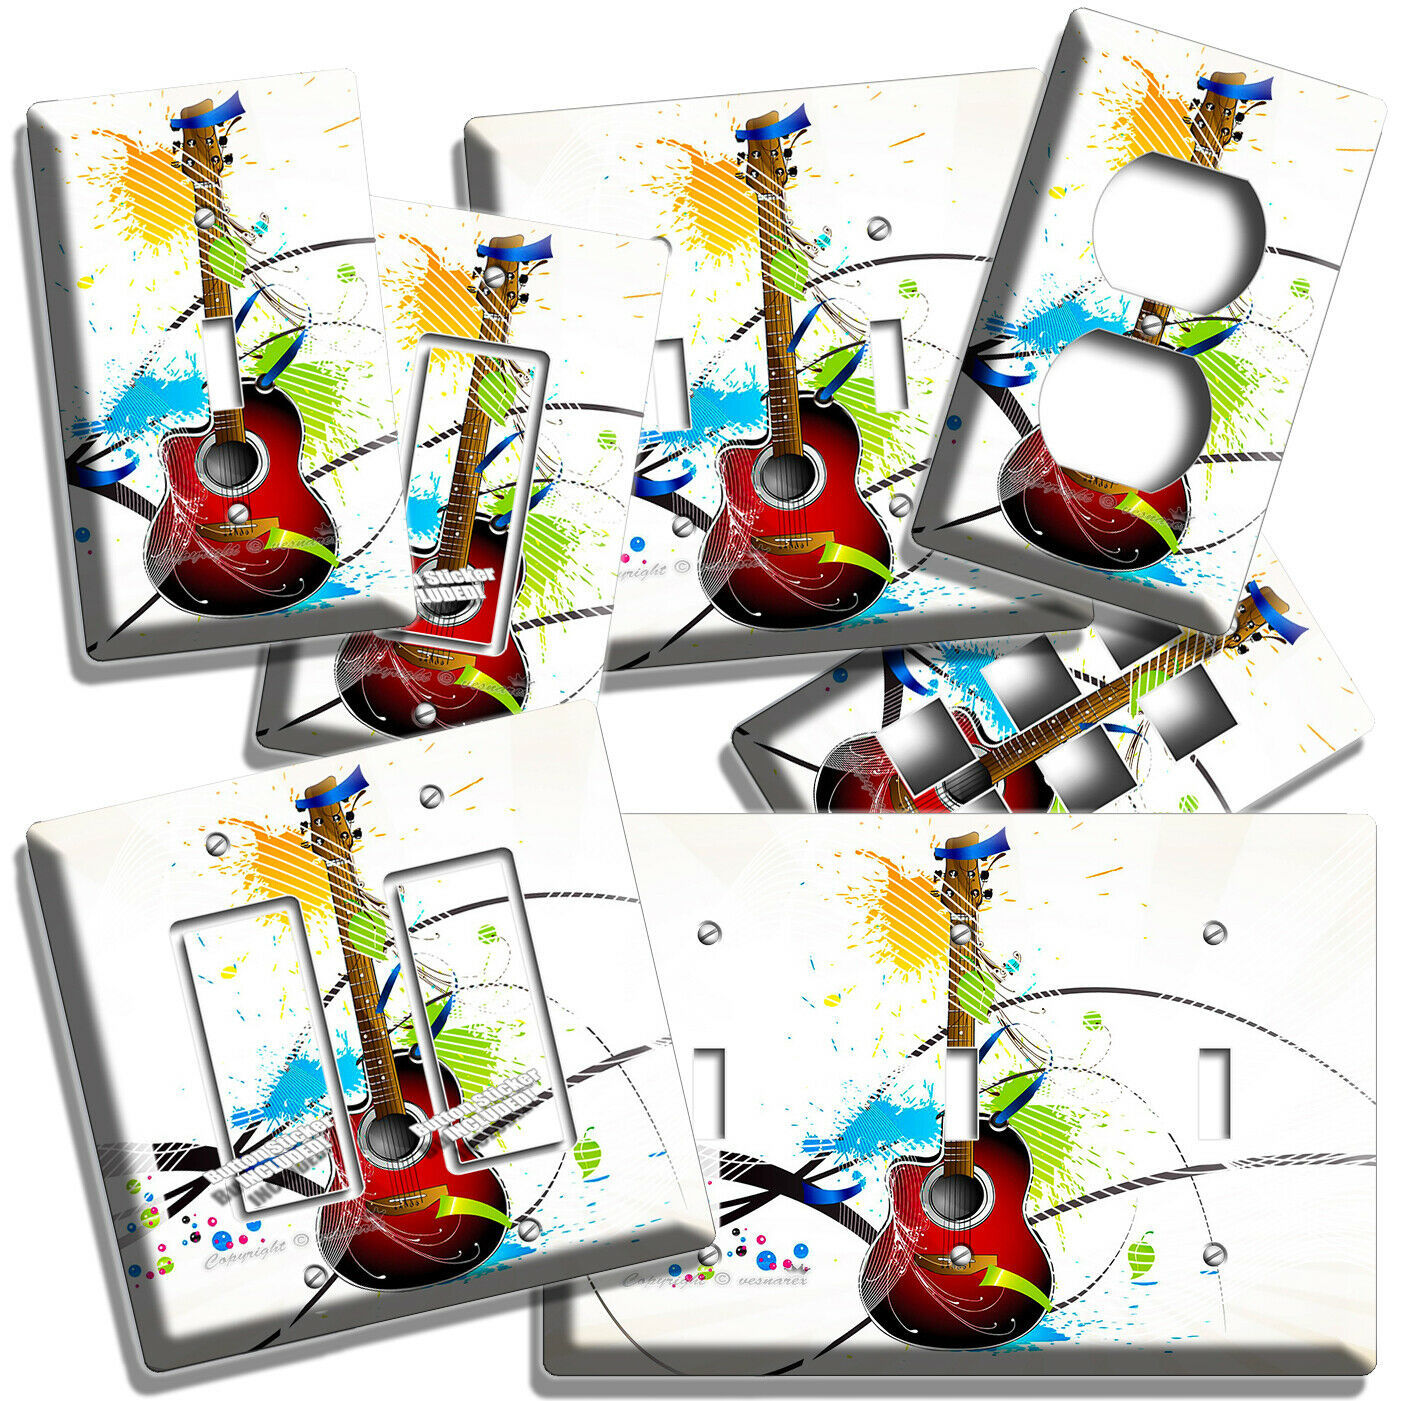 ABSTRACT ART ACOUSTIC GUITAR LIGHT SWITCH OUTLET WALL PLATES MUSIC STUDIO DECOR